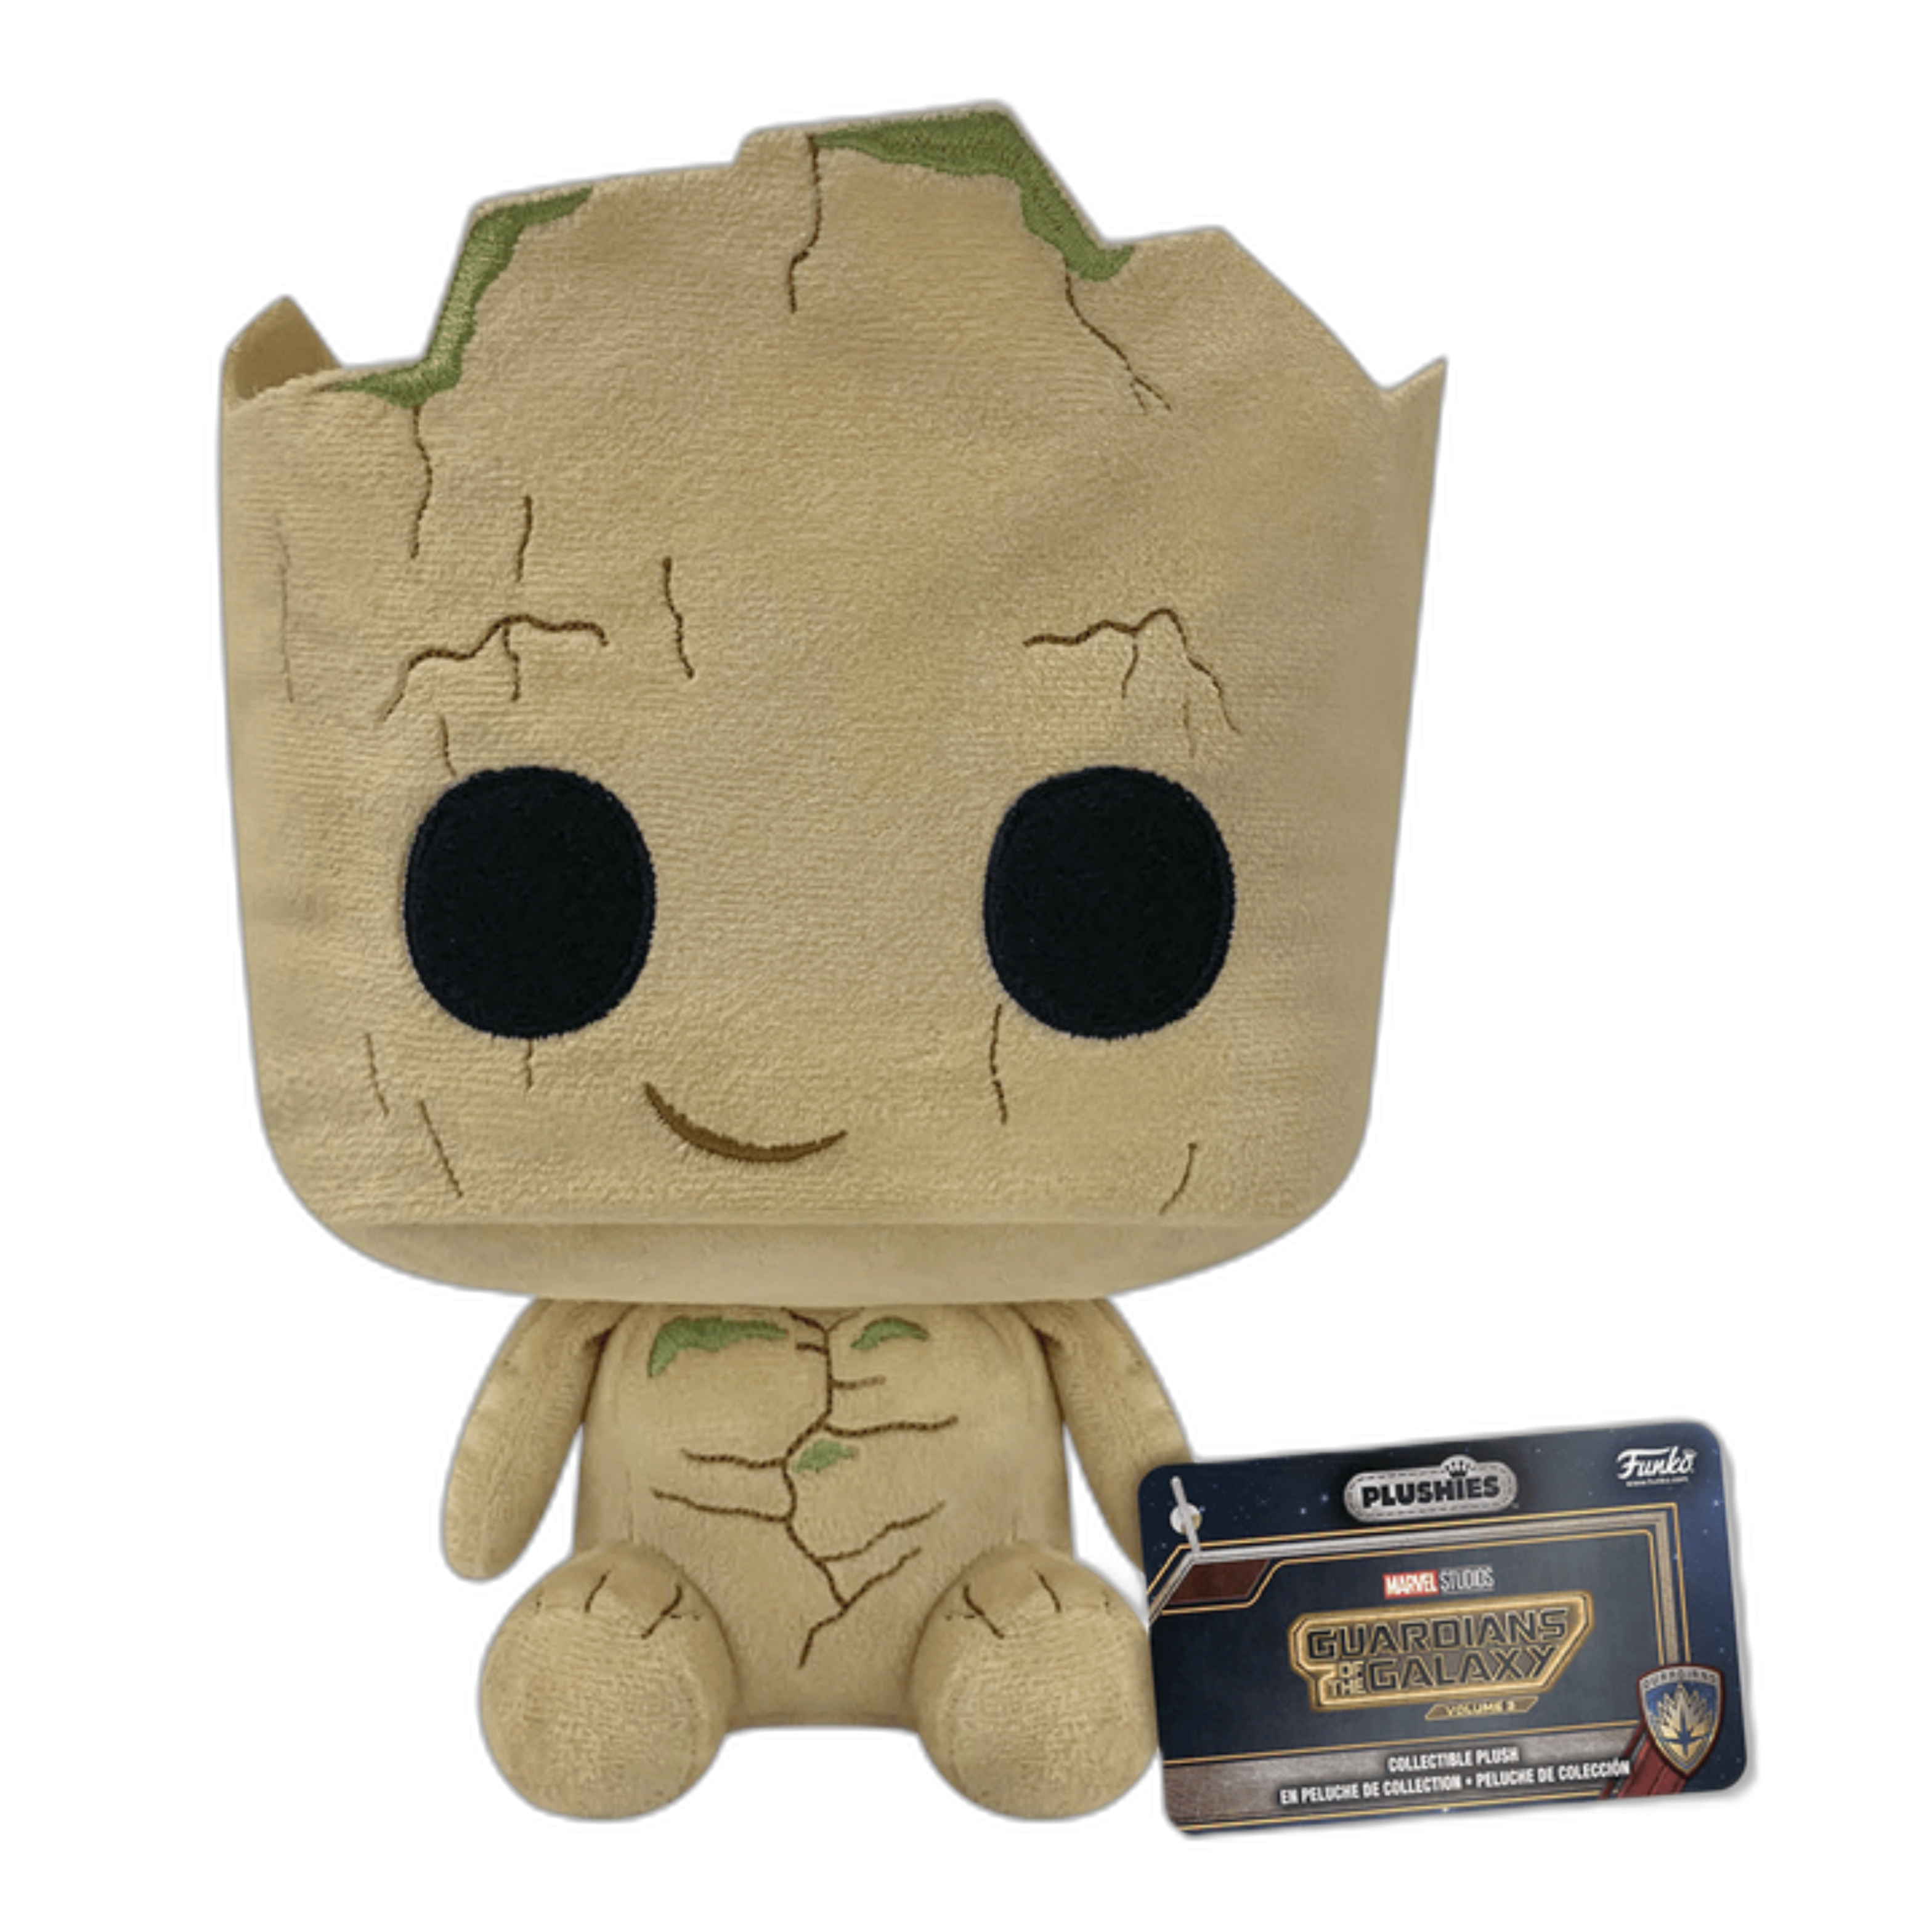 I Am Groot! The 12 Best Groot Collectibles, Toys & Gifts To Show